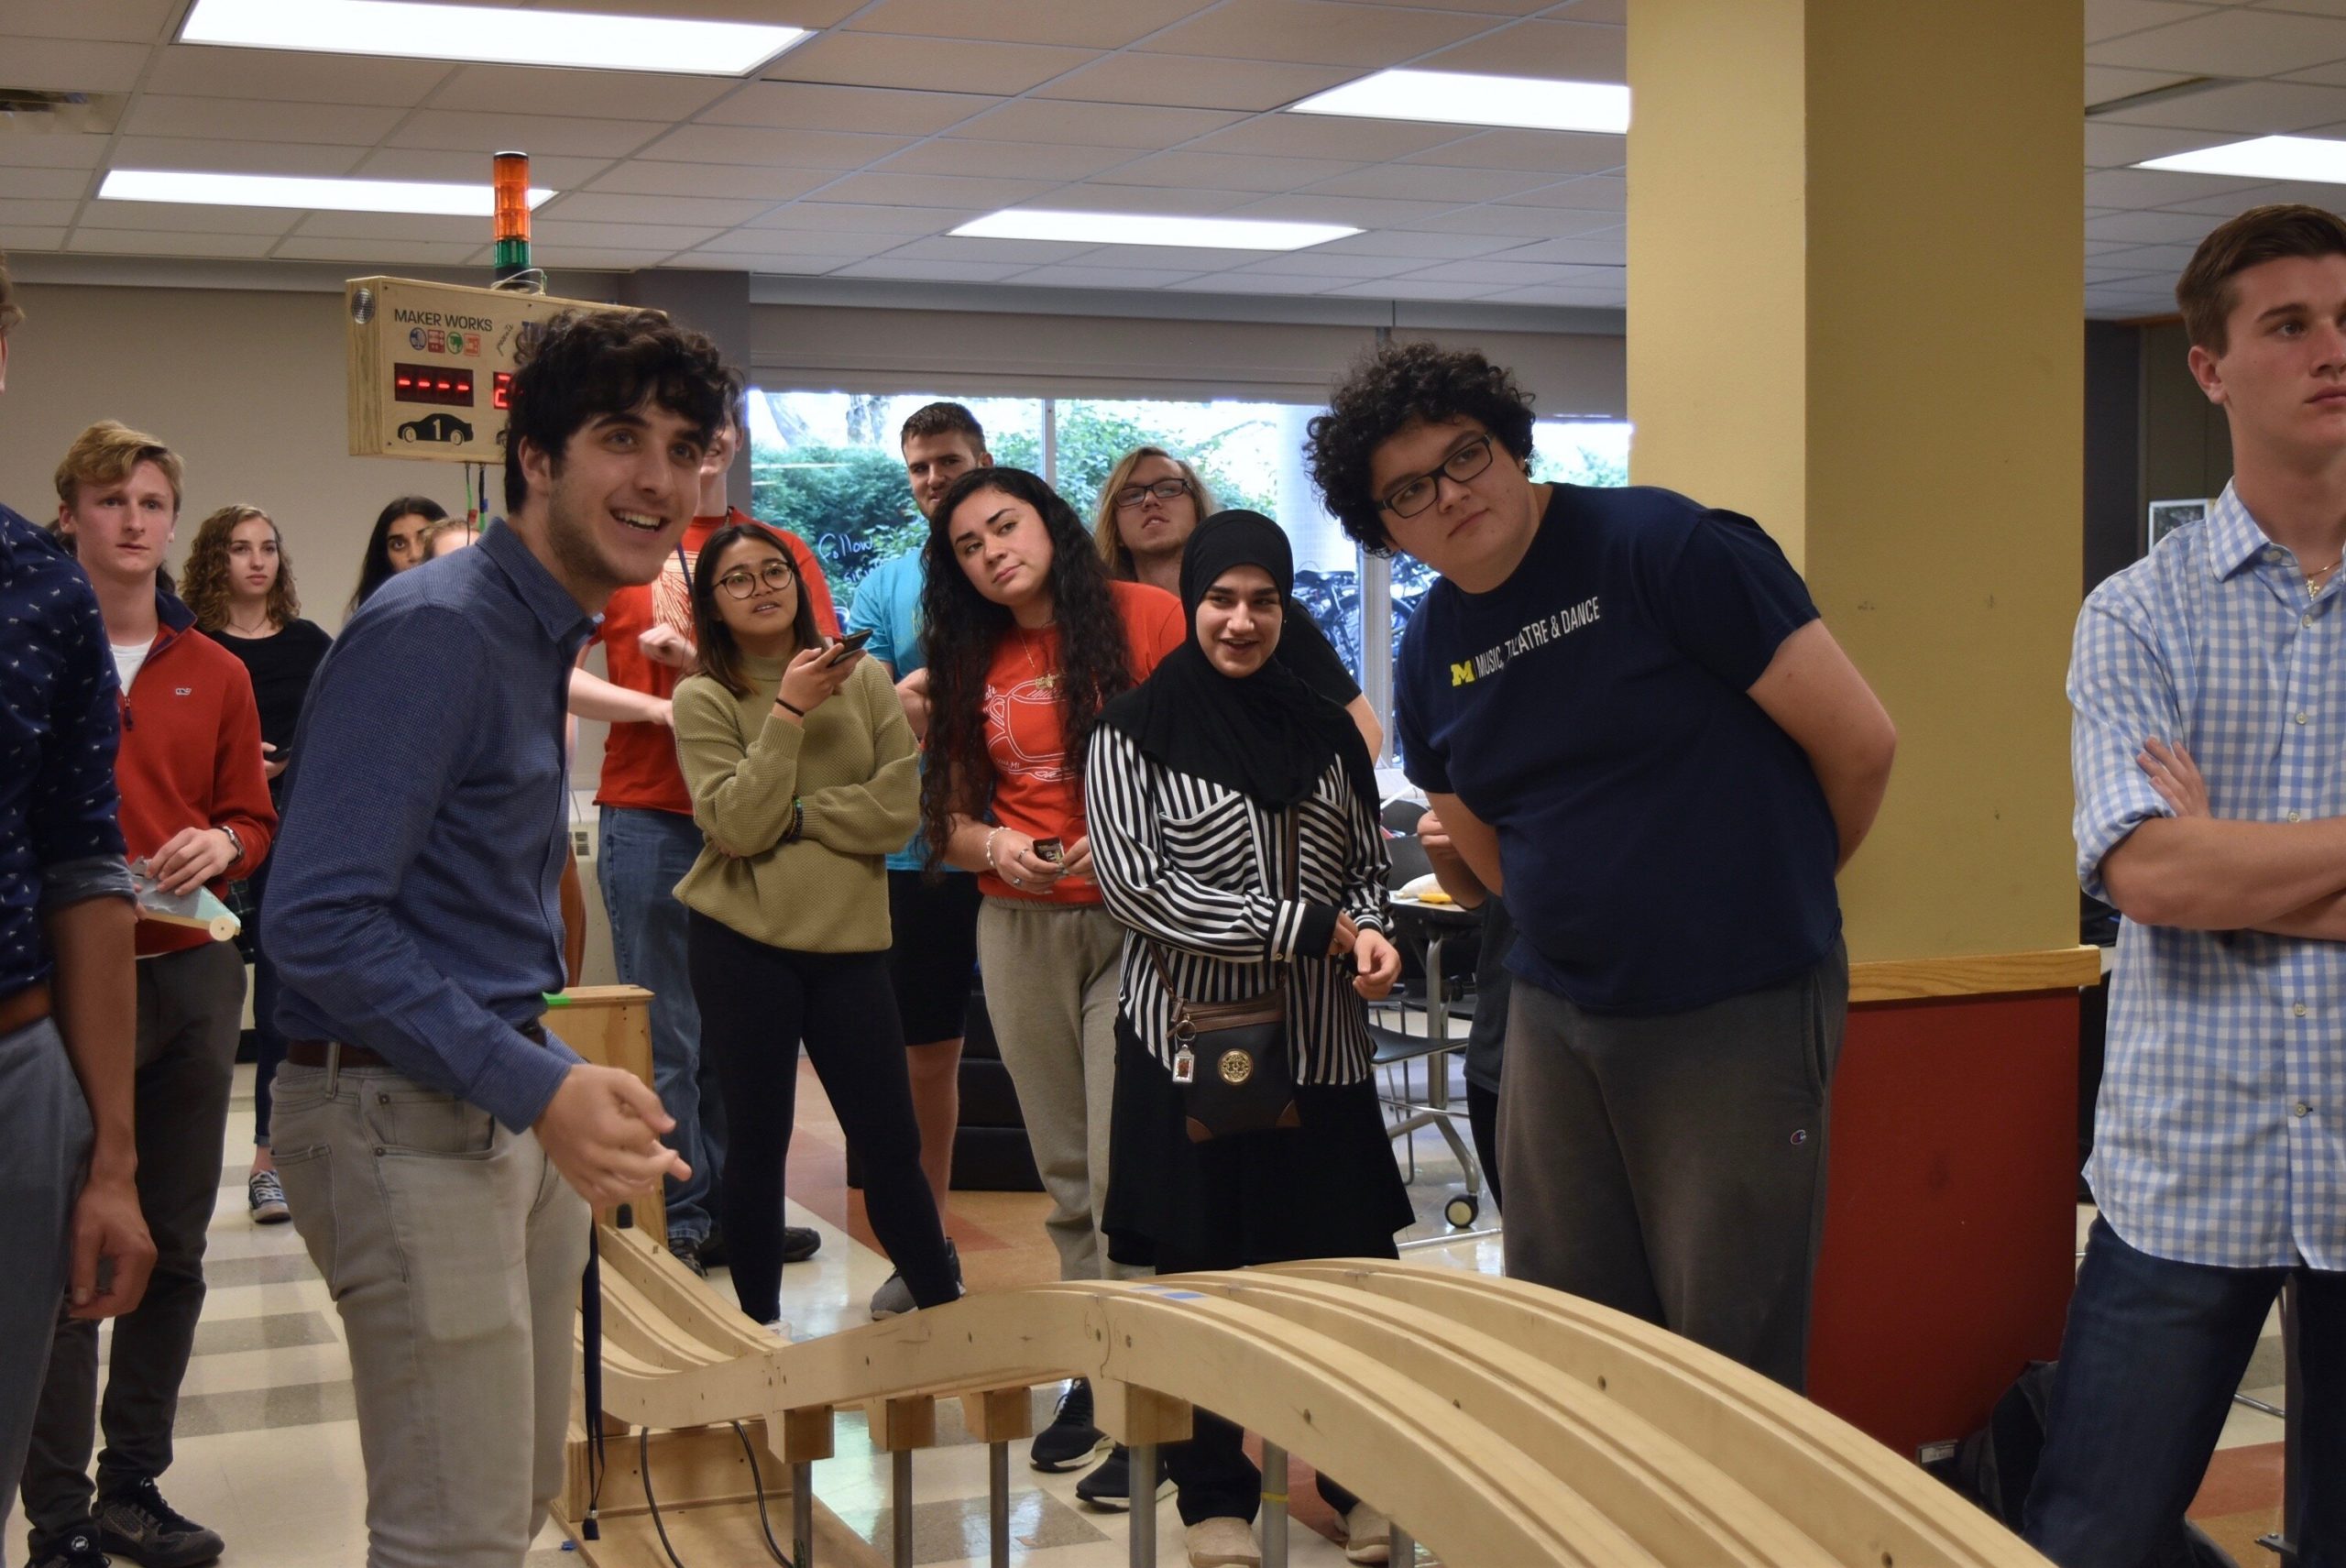 A group of students gathered around a wooden race track, anticipating the results